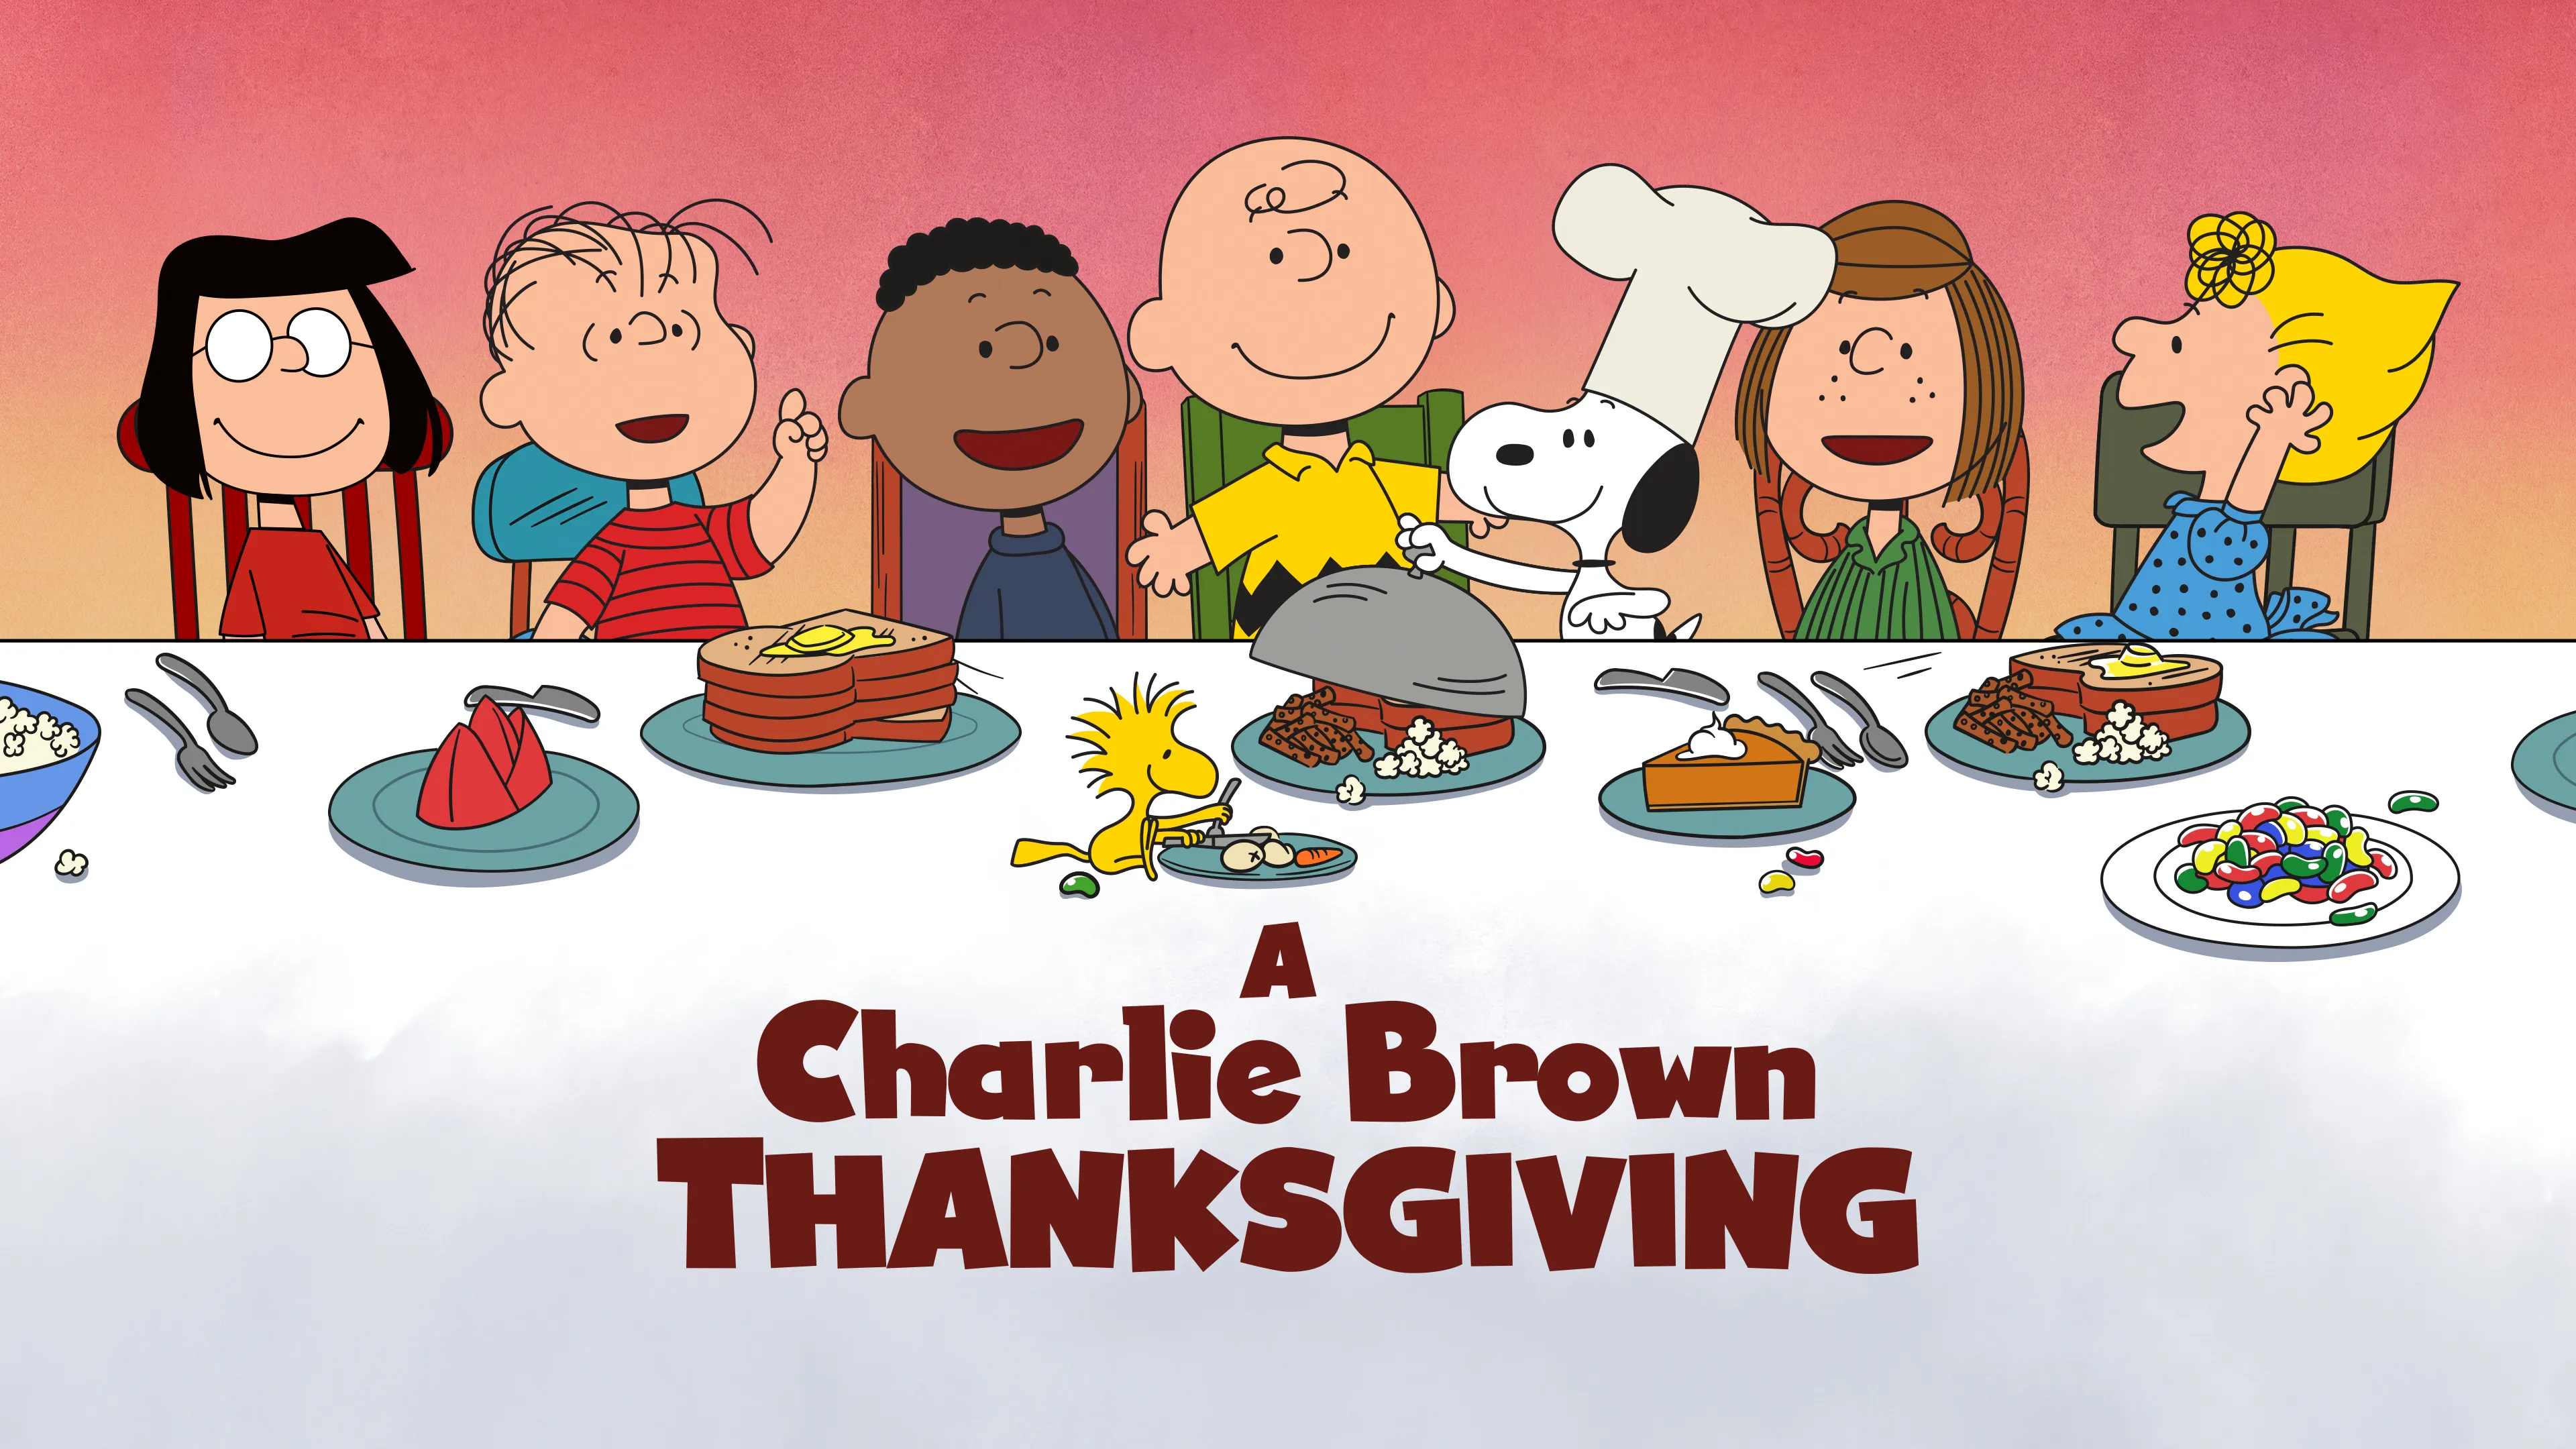 3840x2160 A Charlie Brown Thanksgiving: How to watch or stream it